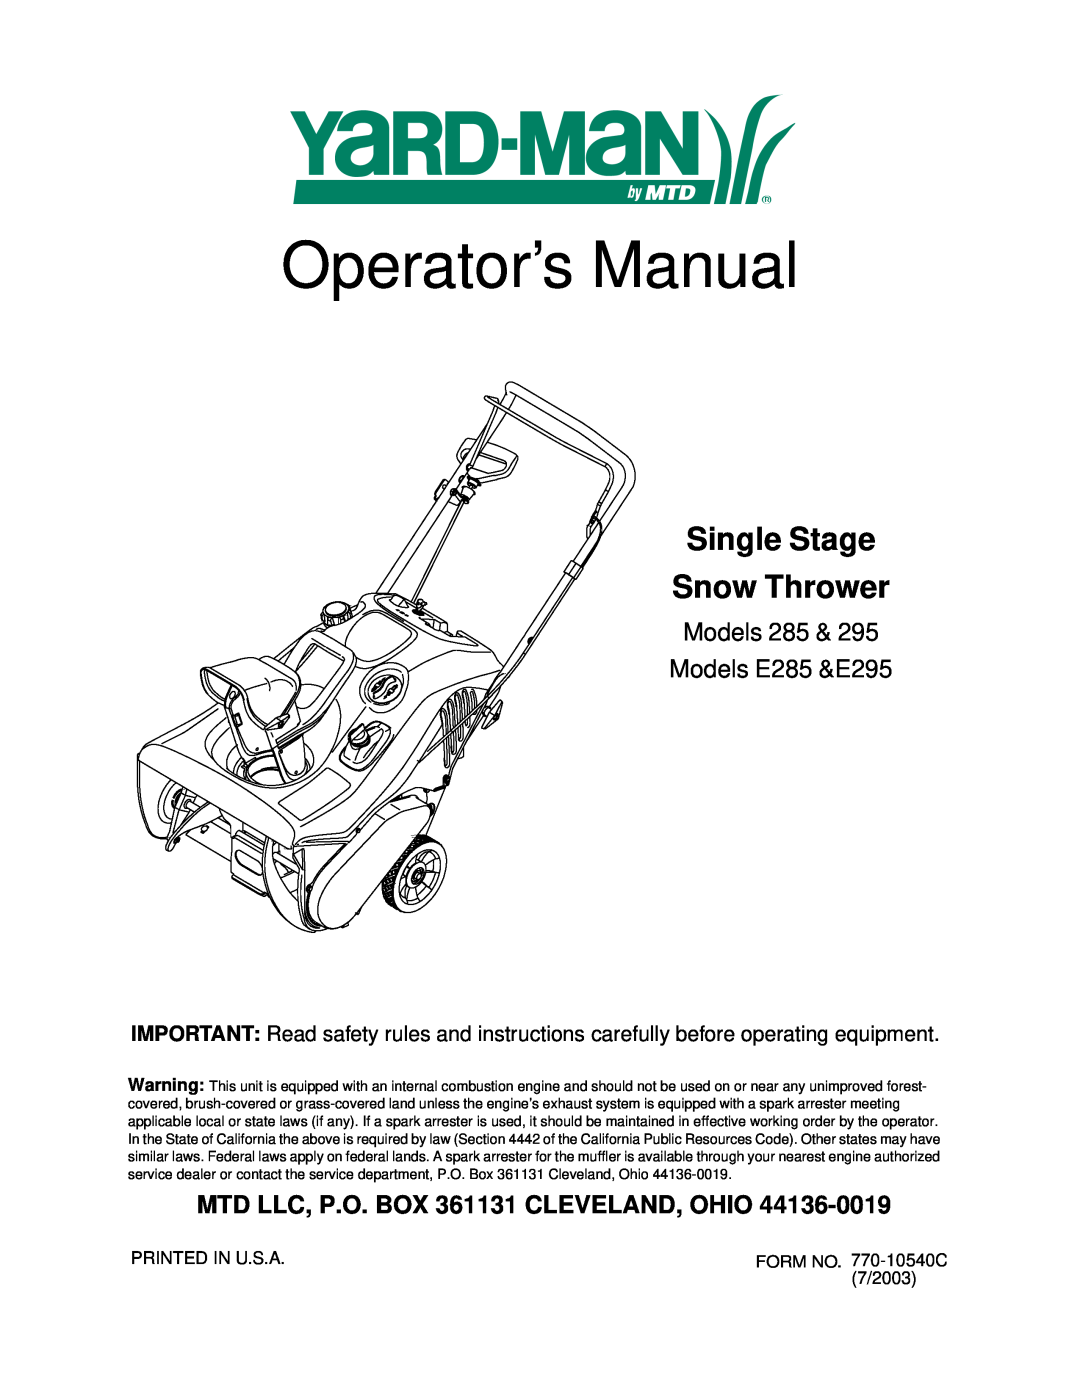 Yard Machines manual Single Stage Snow Thrower, Operator’s Manual, Models 285 & Models E285 &E295 